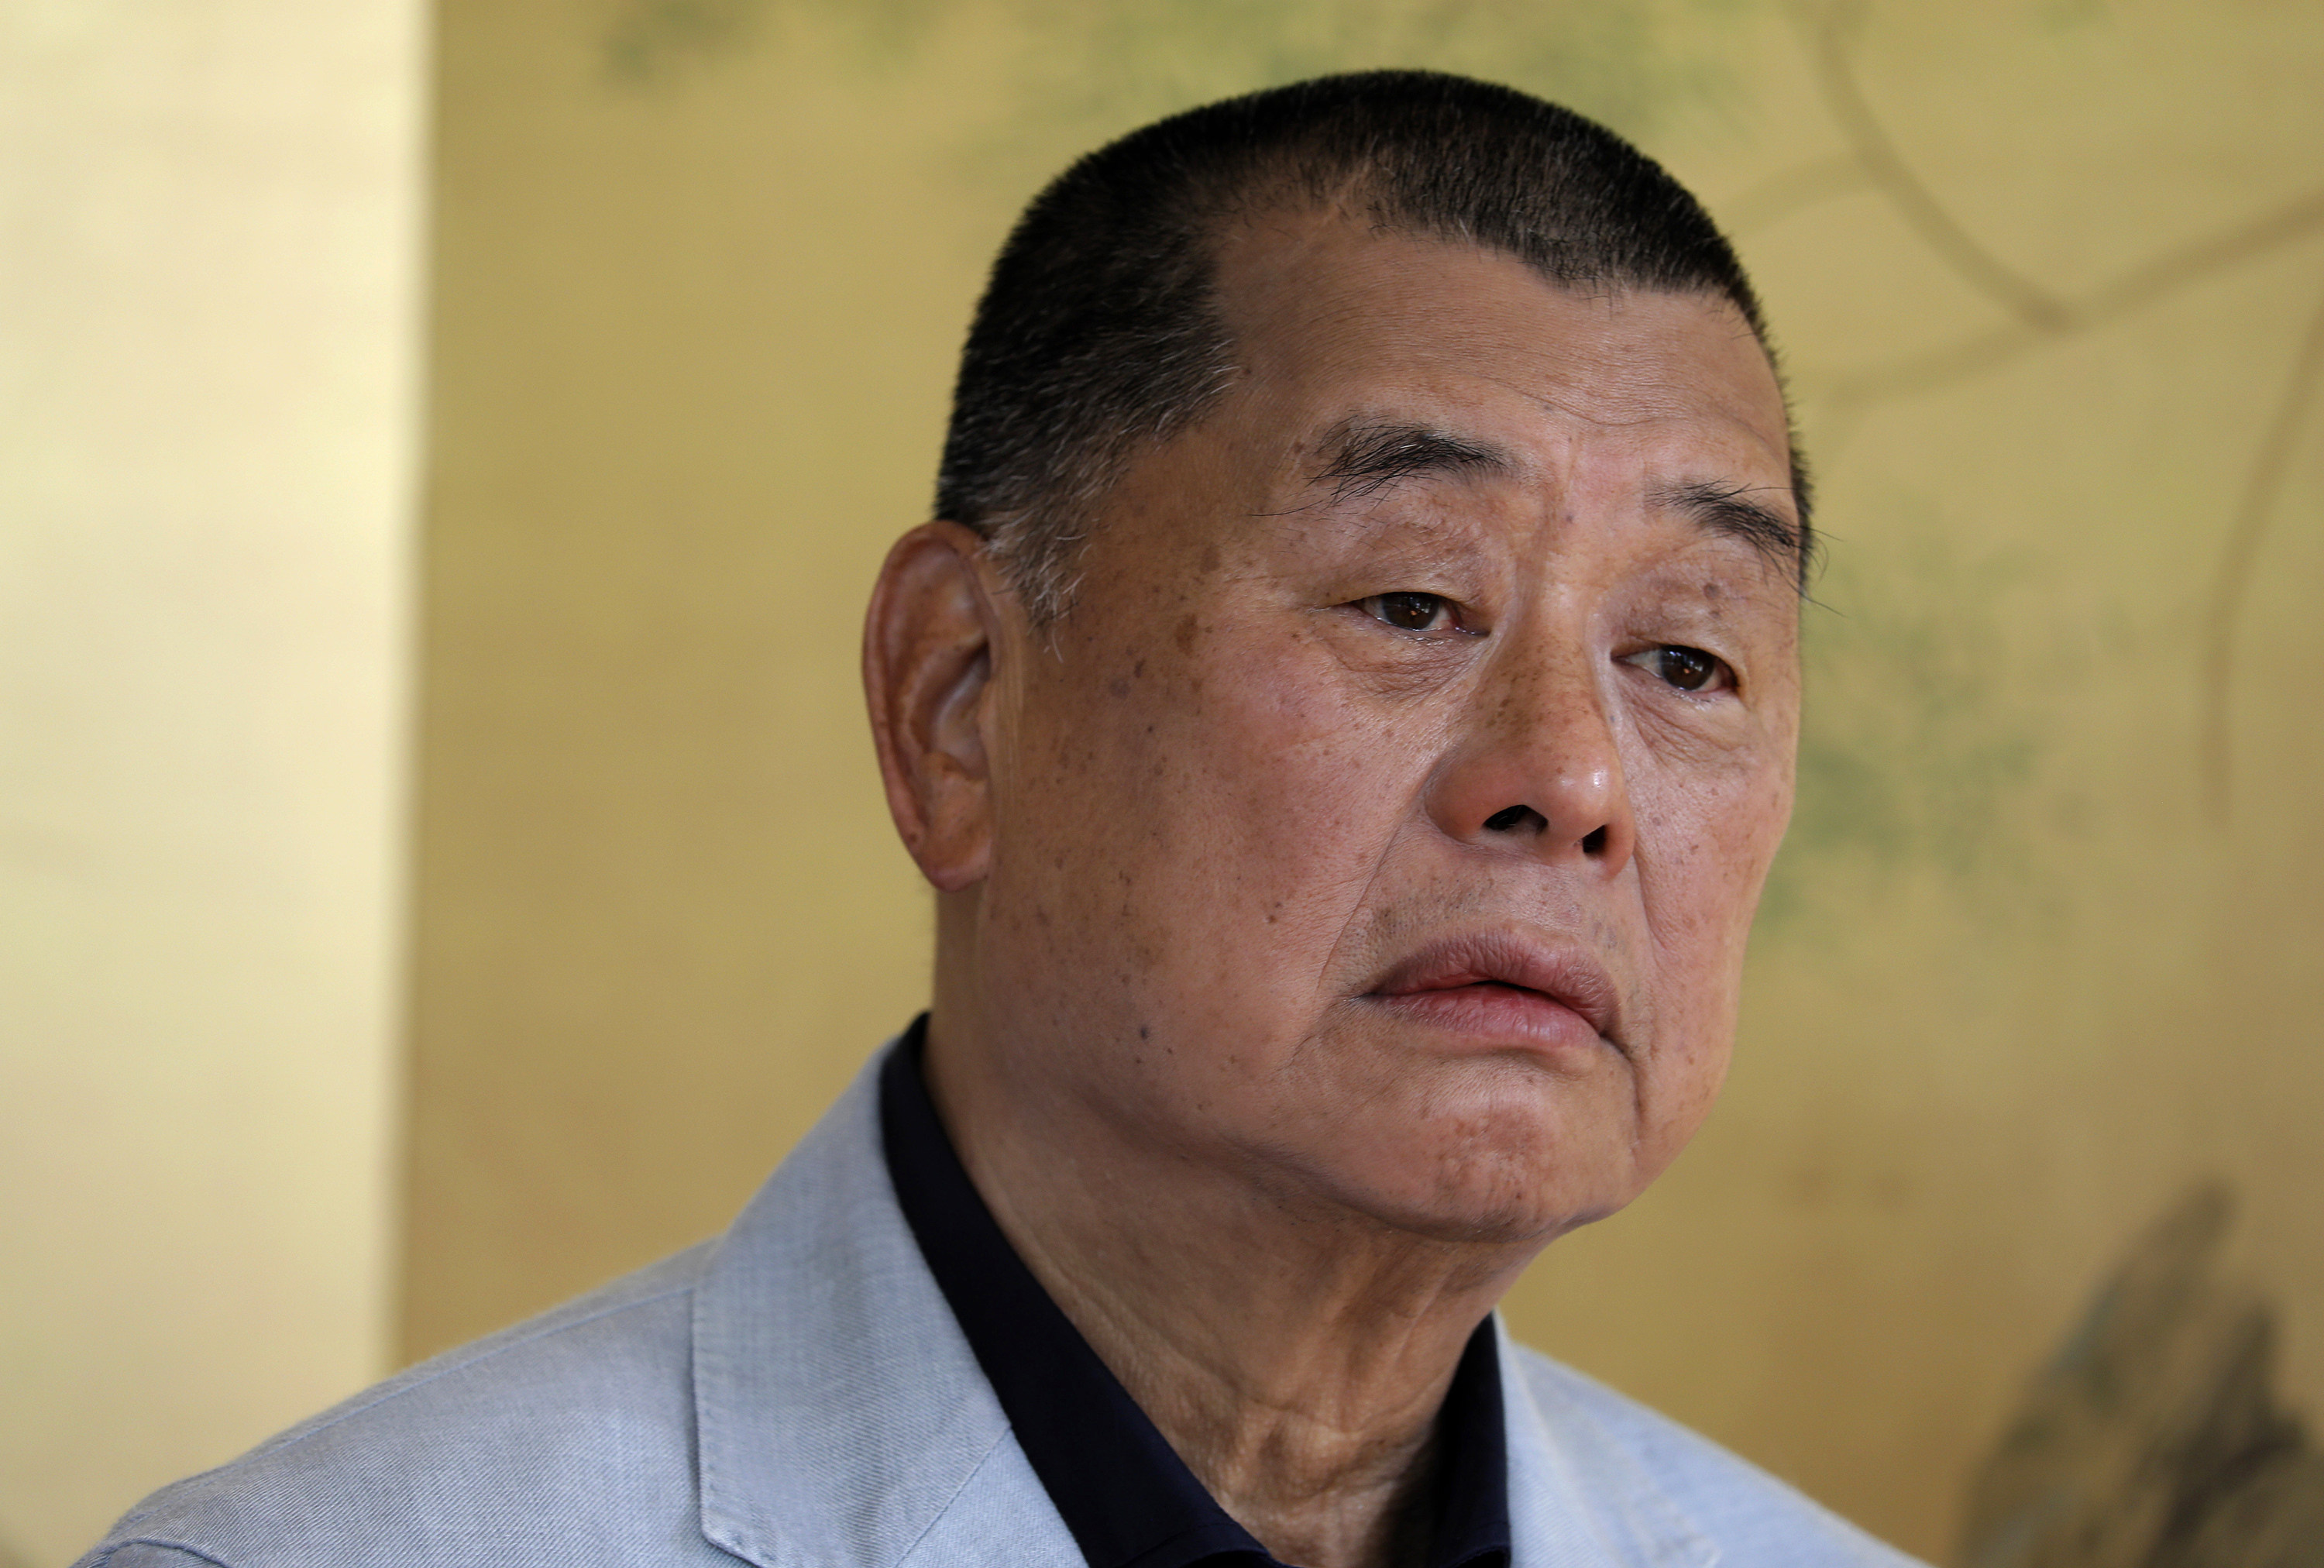 Hong Kong media tycoon Jimmy Lai has been ordered to pay legal costs for two failed legal challenges he initiated. Photo: AP